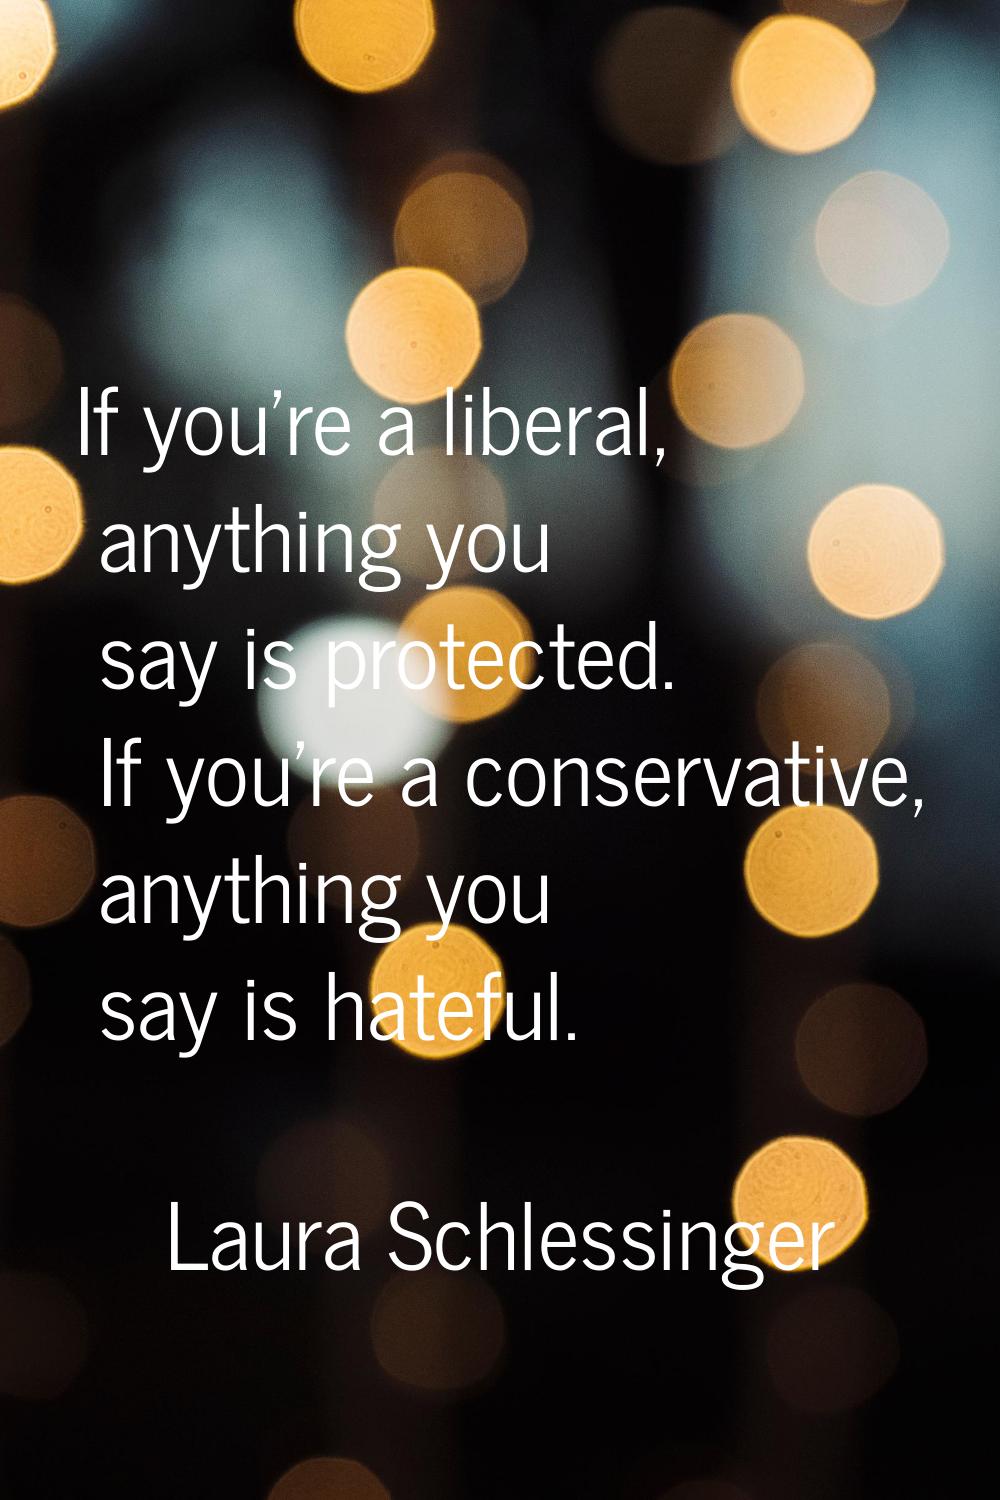 If you're a liberal, anything you say is protected. If you're a conservative, anything you say is h